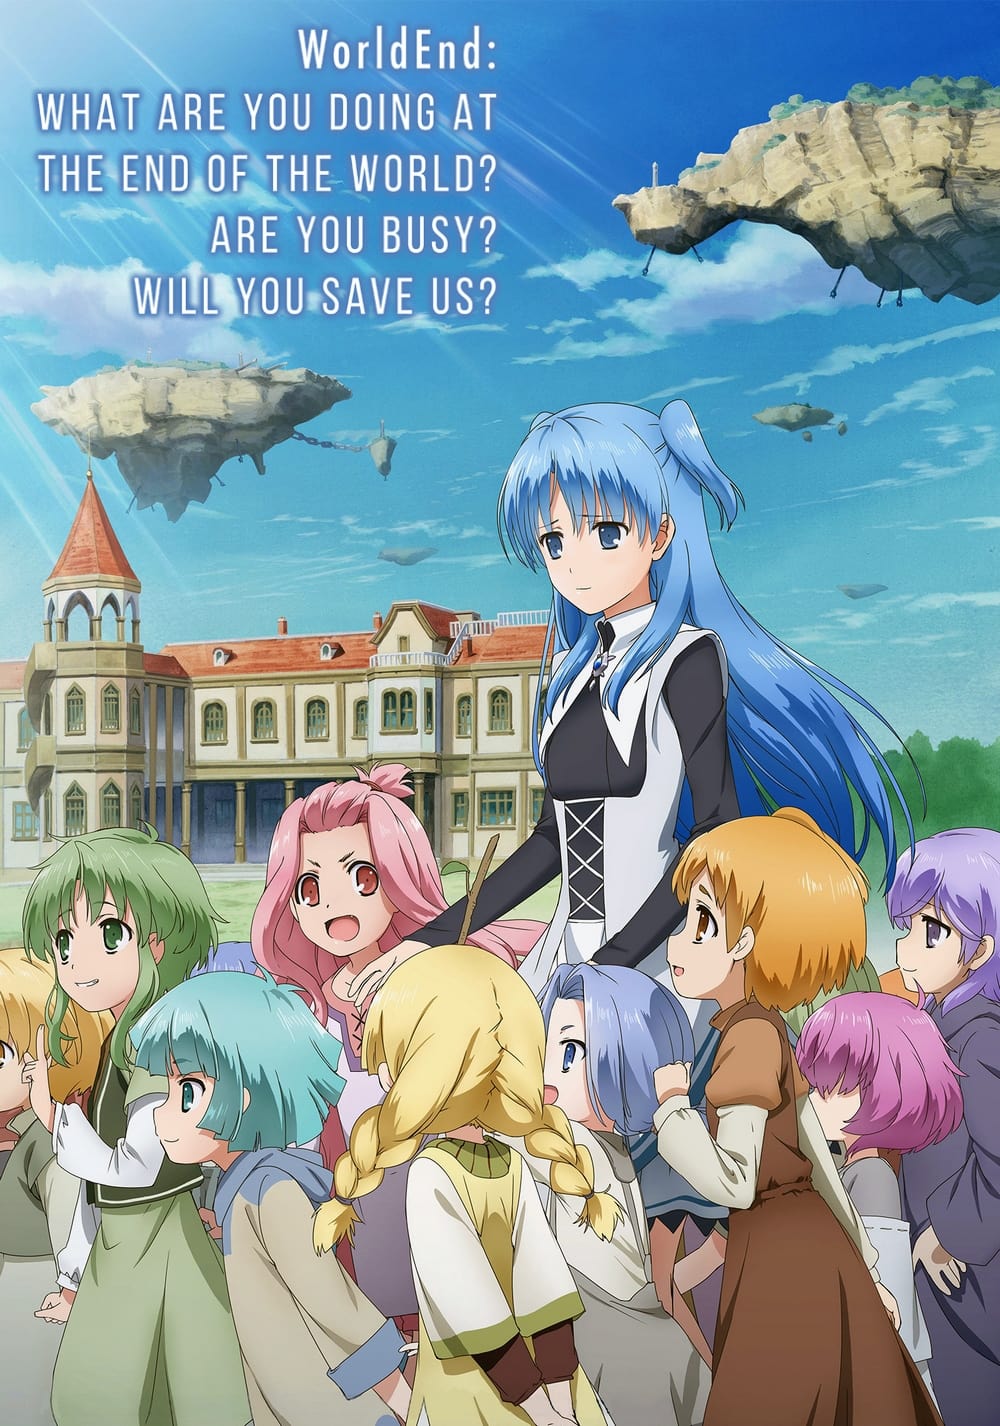 WorldEnd: What are you doing at the end of the world? Are you busy? Will you save us? (2017)